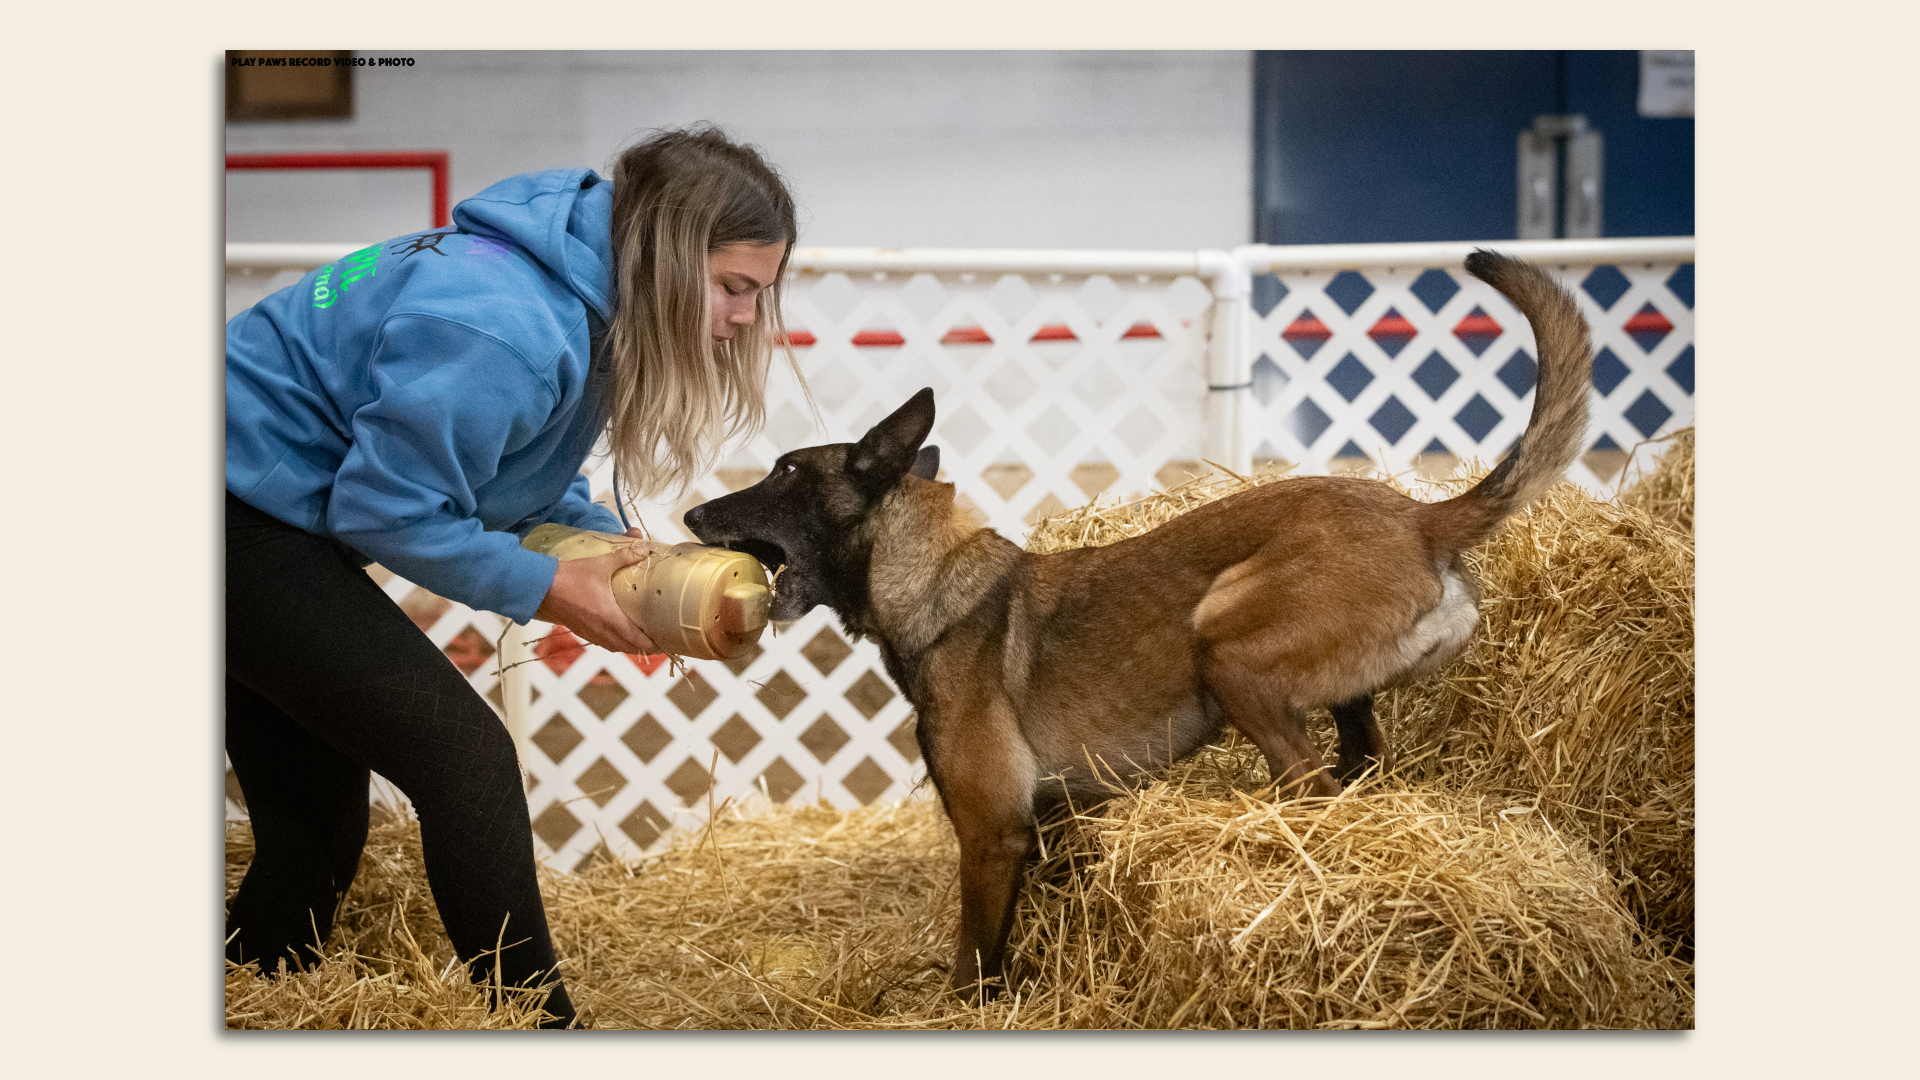 Sarah Bostock works with Vali, a Belgian Malinois, during the Barn Hunt Association's National competition in 2022. Photo: Play Paws Record Video & Photo.